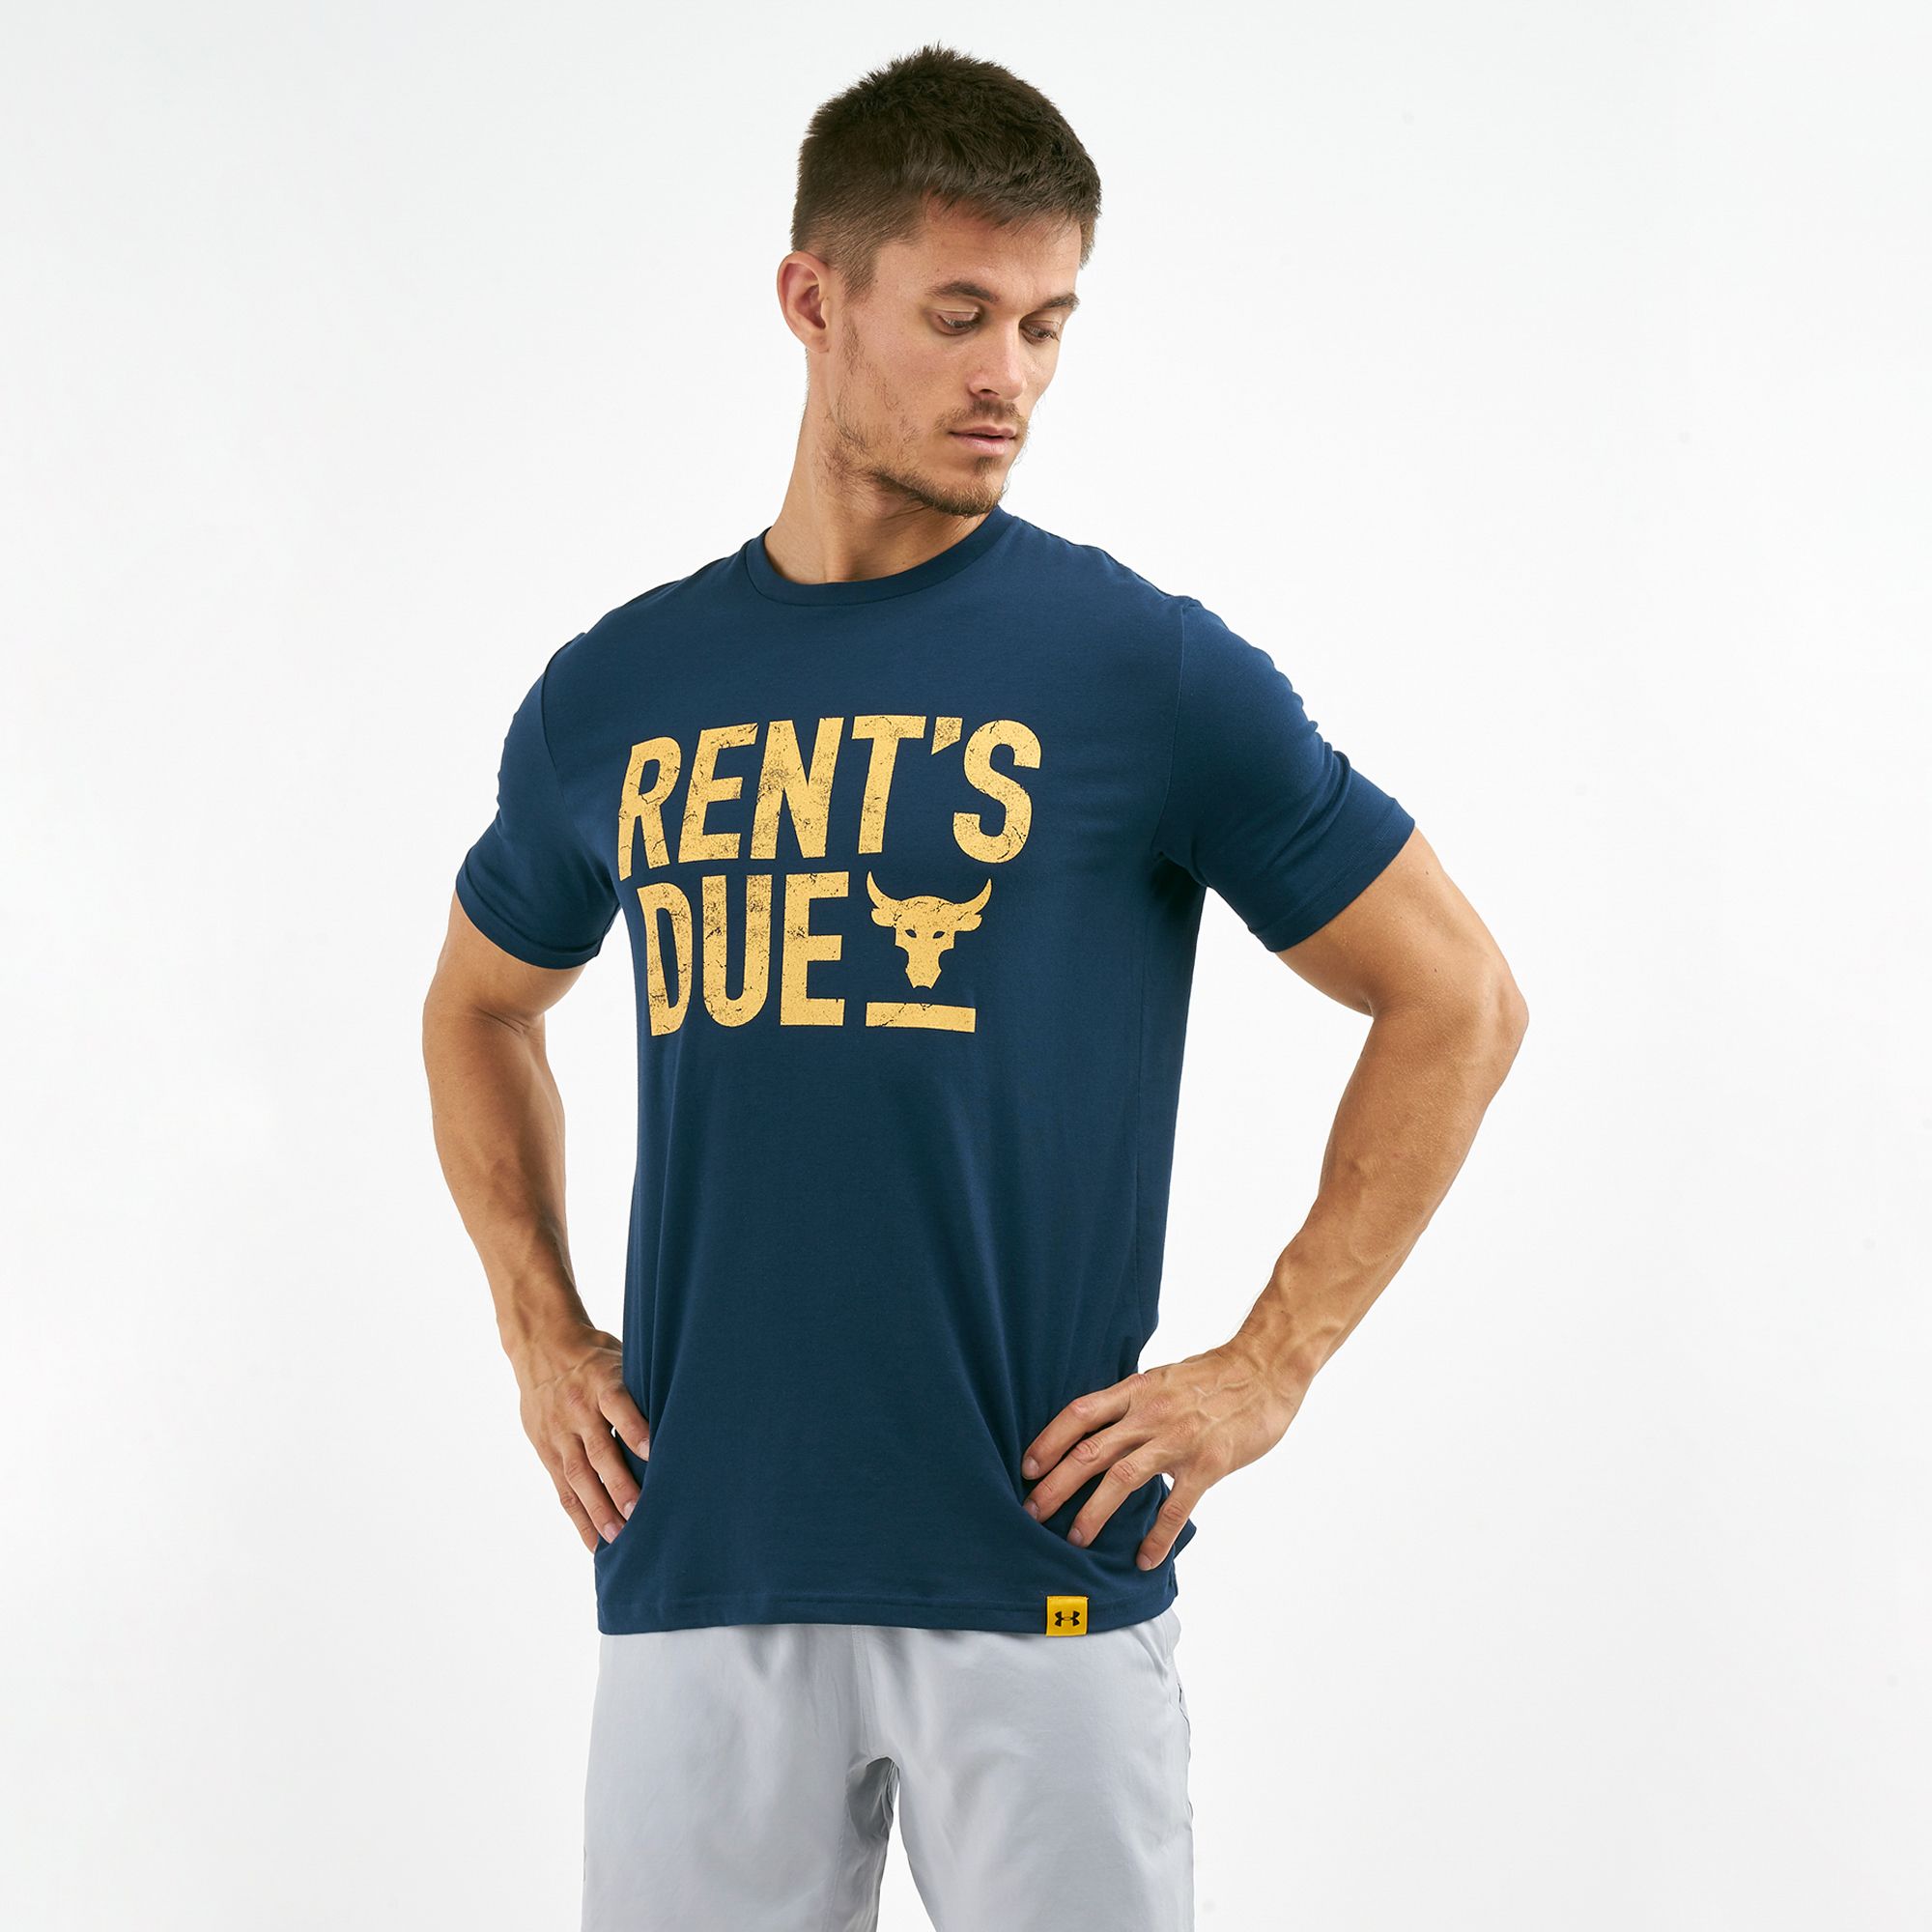 under armour rents due